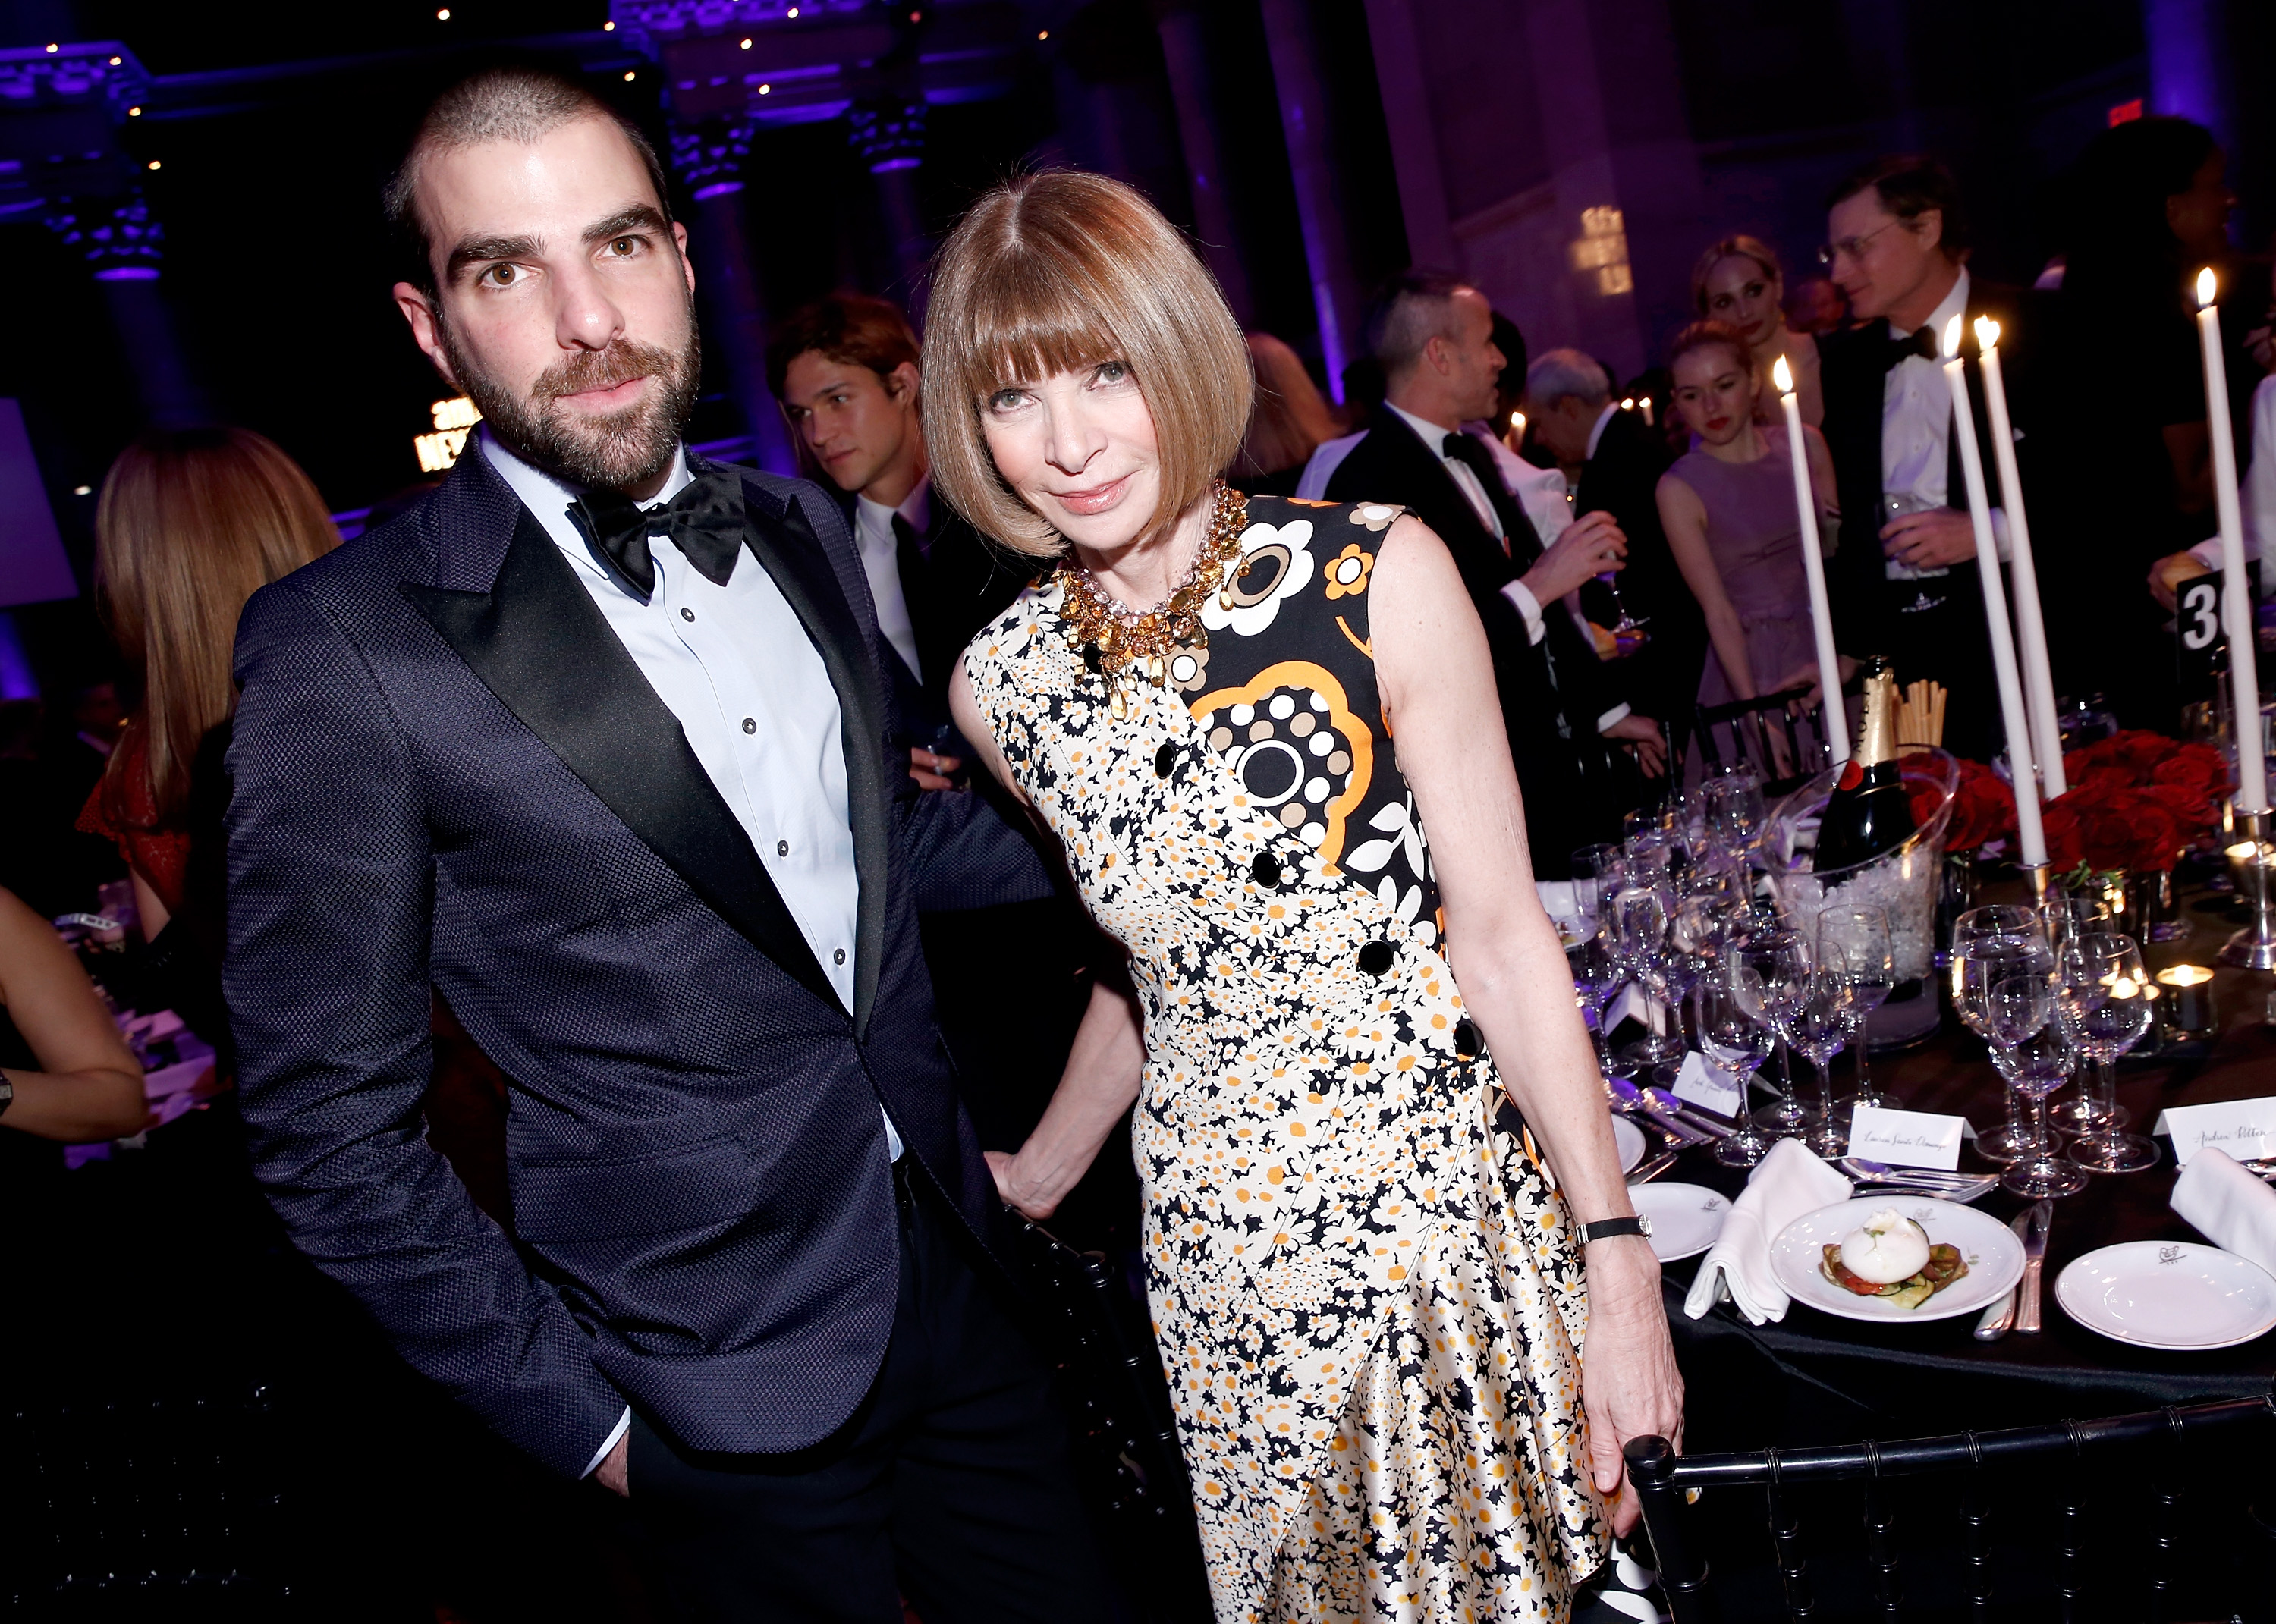 Zachary Quinto (L) and Anna Wintour attend the Moet & Chandon toast to the amfAR Gala at Cipriani Wall Street